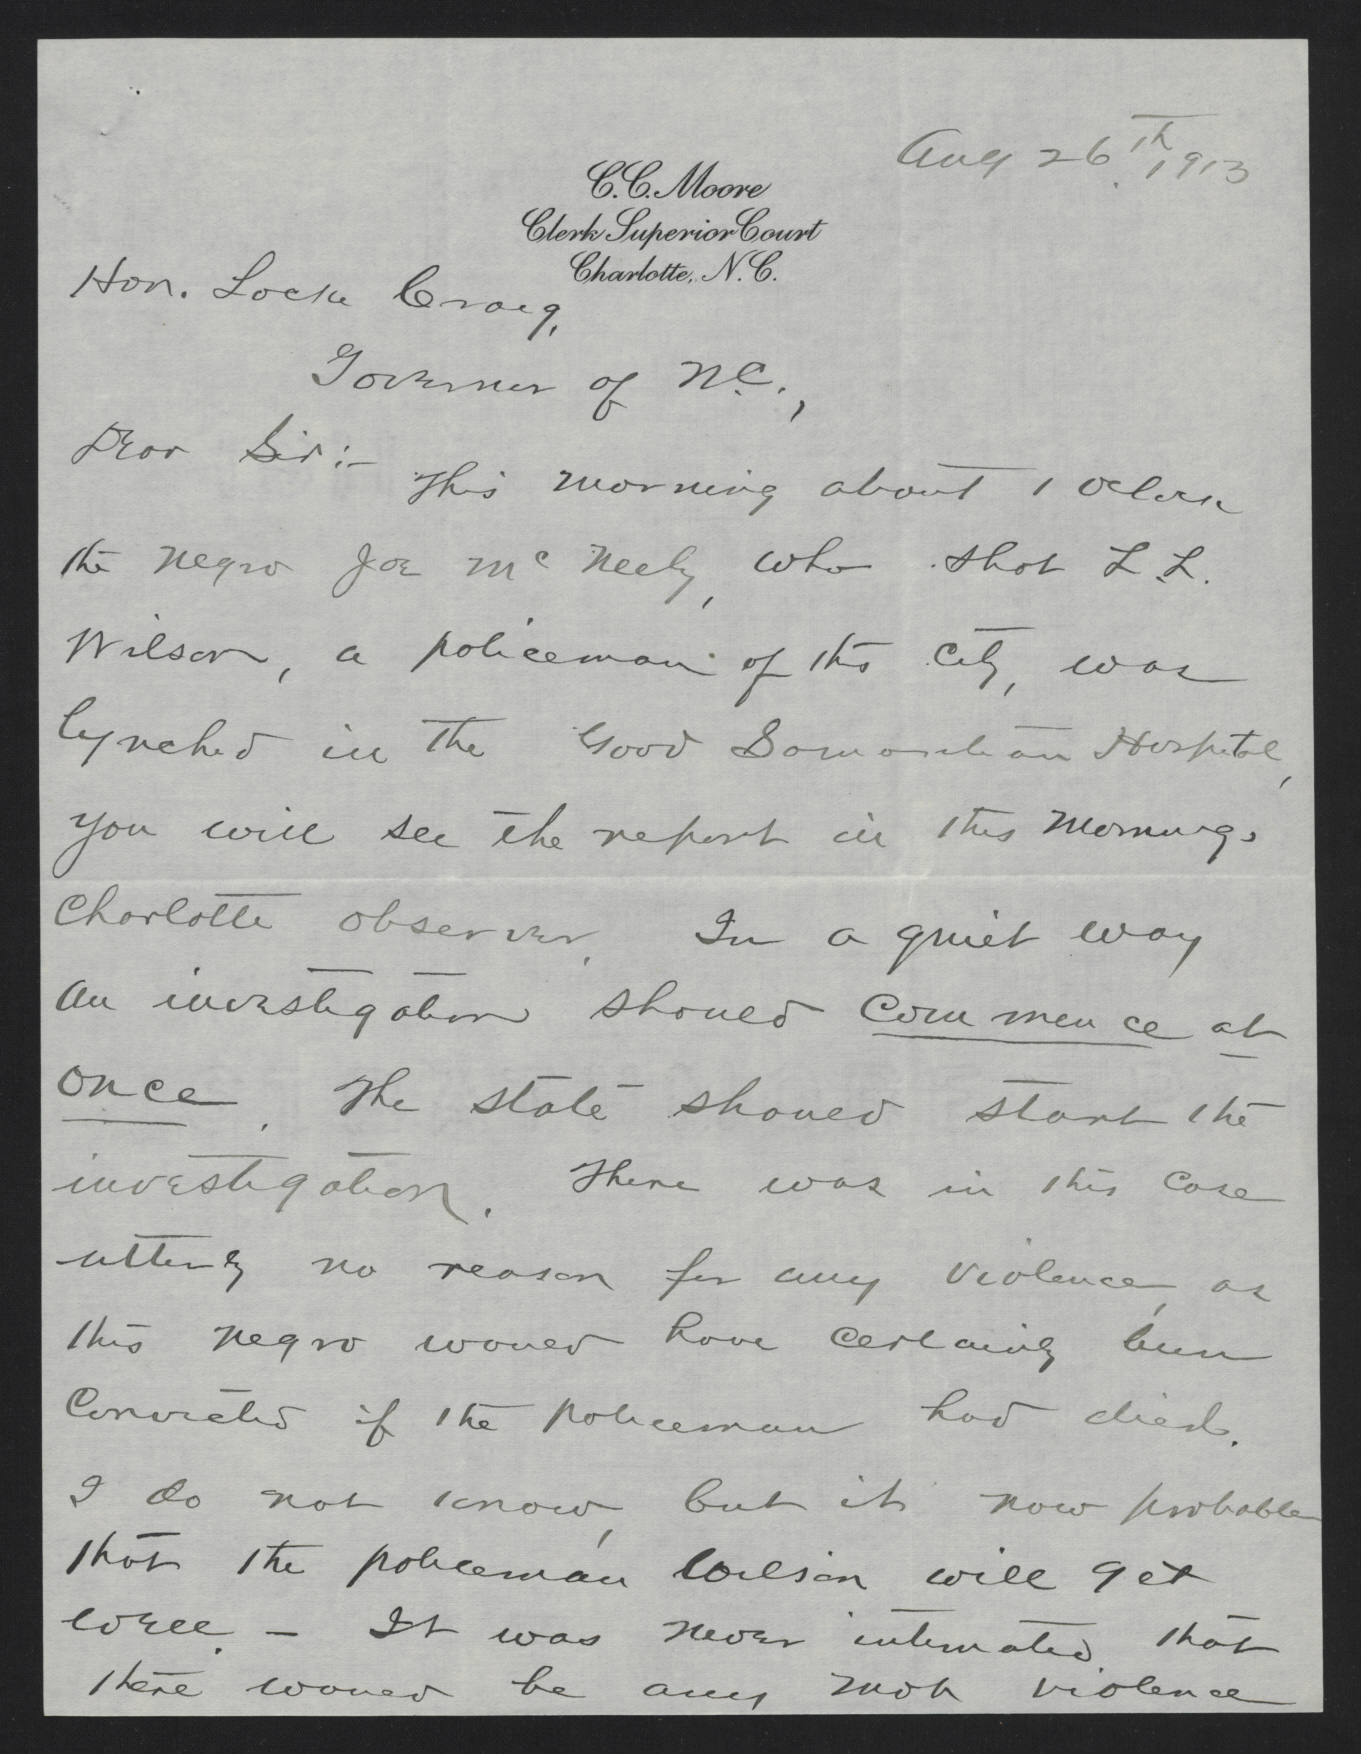 Letter from Wood to Craig, August 26, 1913, page 1